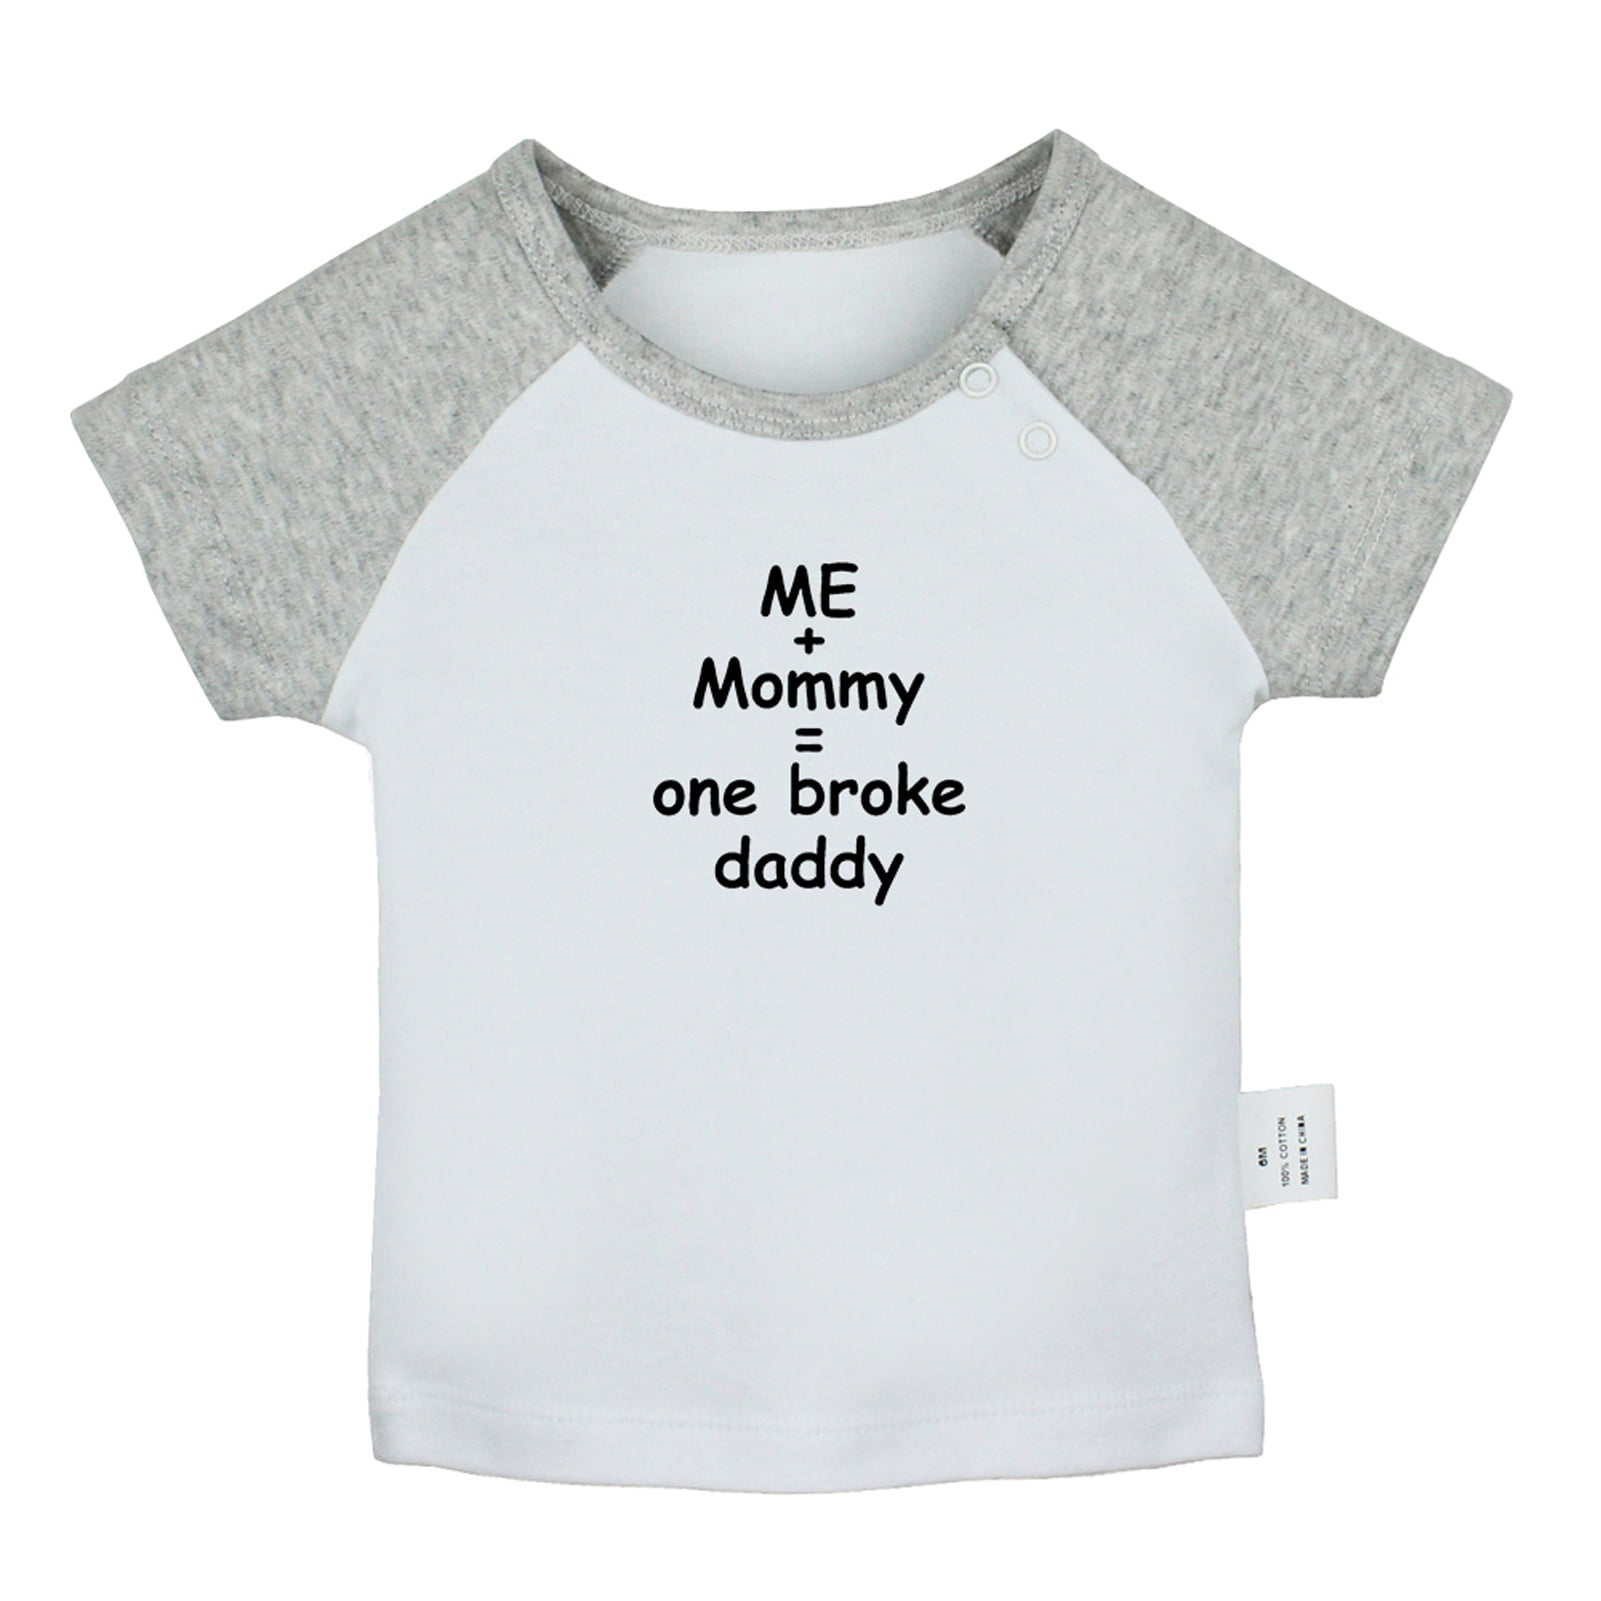 I only Cry When Ugly People Hold Me Funny T shirt For Baby